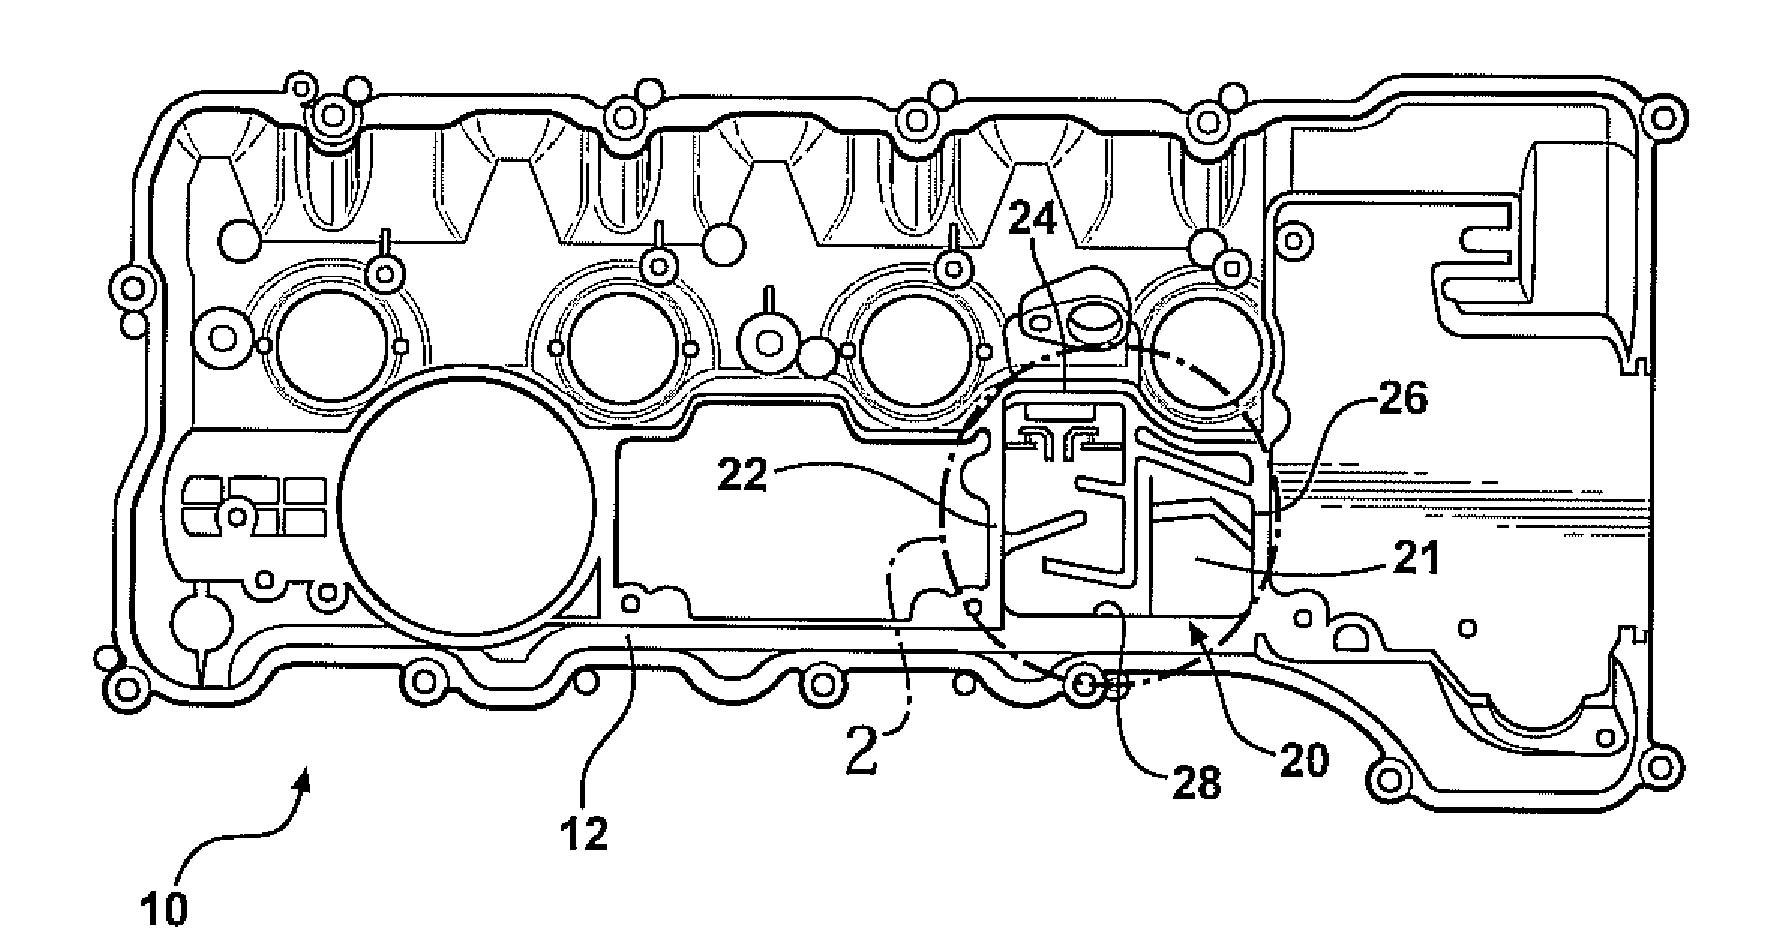 Engine head cover assembly having an integrated oil separator and a removable cover